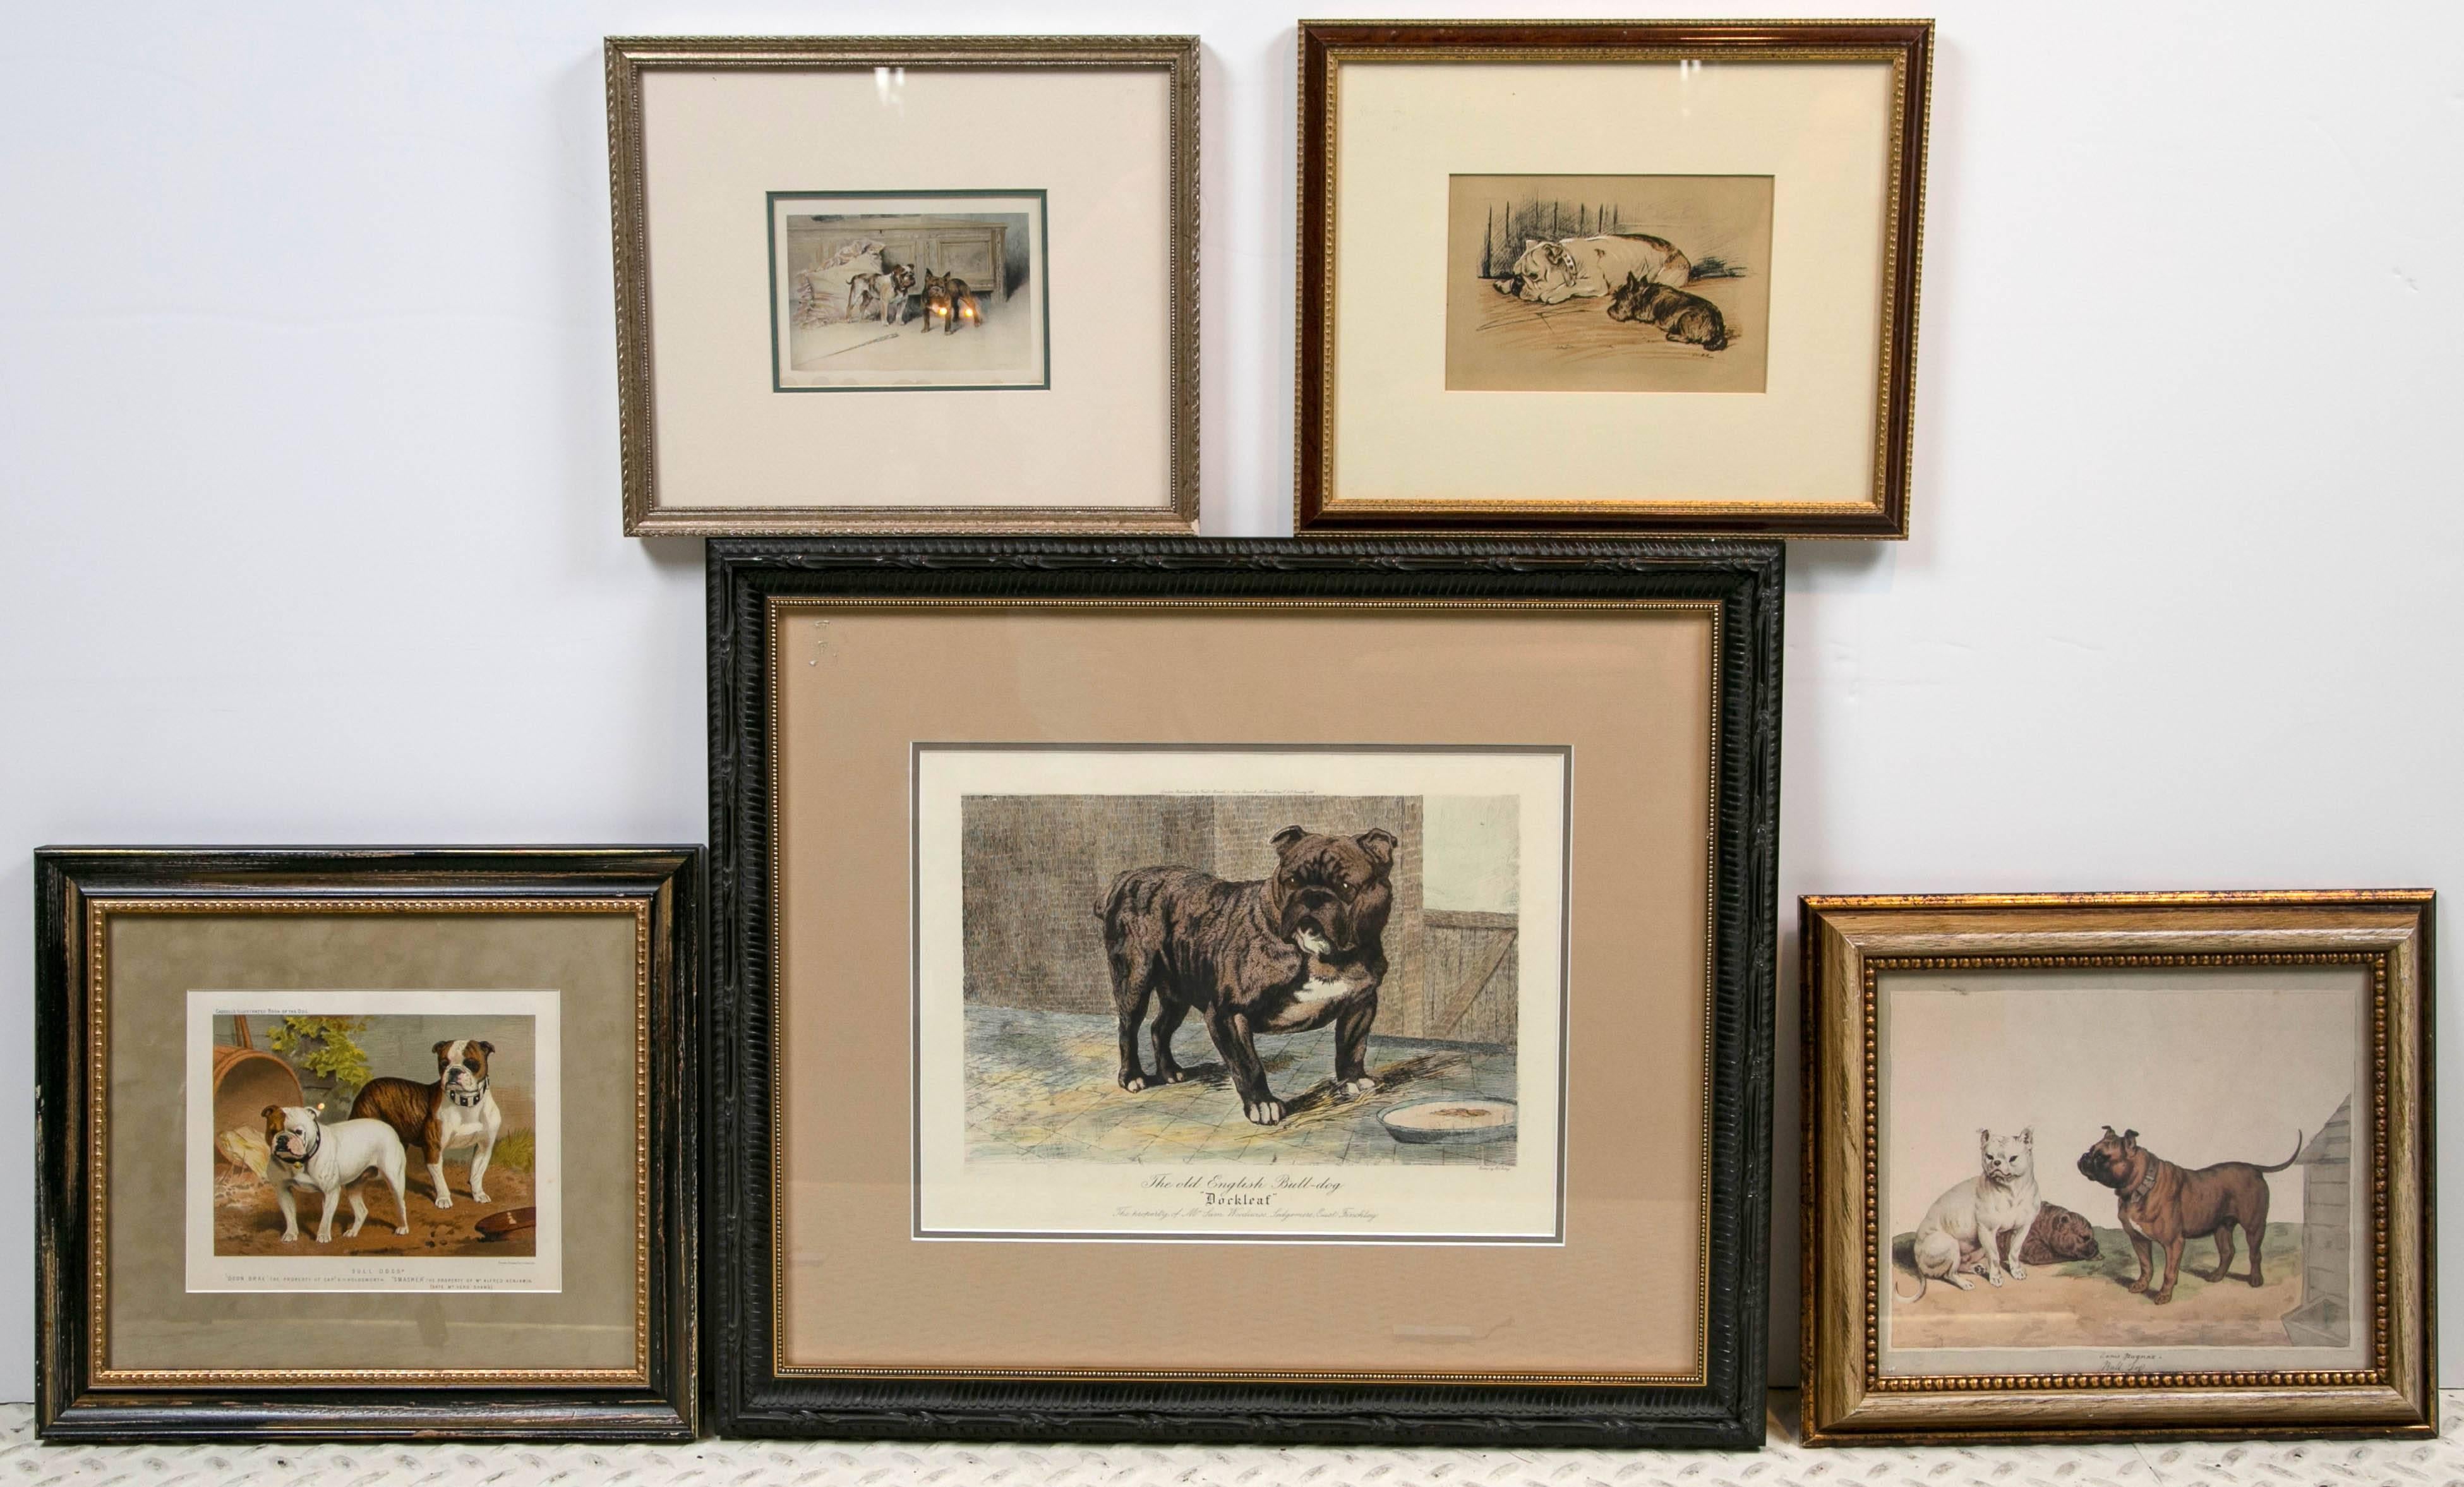 Each piece is professionally matted and framed, five great additions to any collection or a great start for curating a brand new venture. Set includes: 